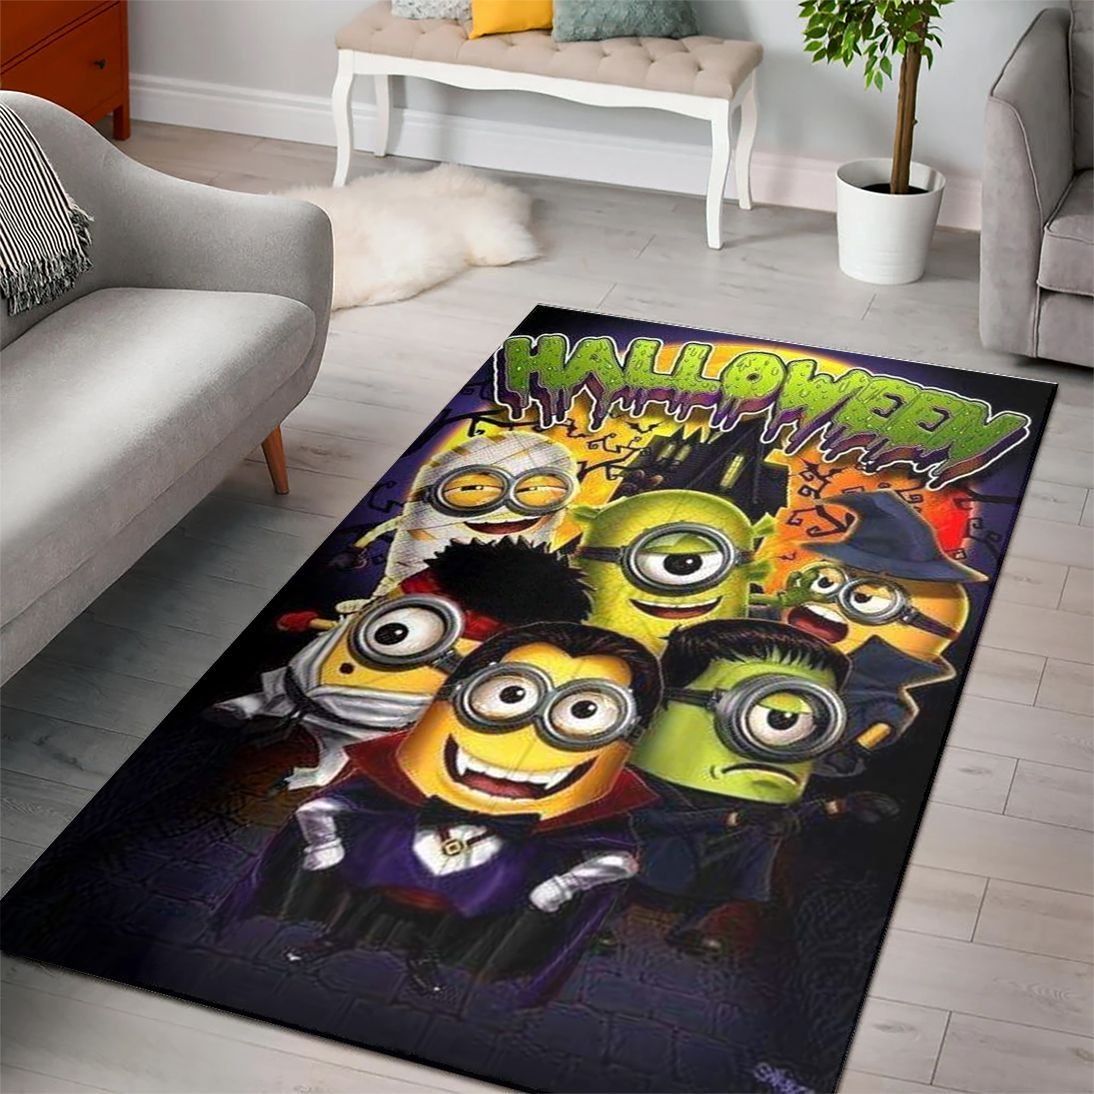 HALLOWEEN MINIONS DESPICABLE MINIONS CARTOON MOVIES AREA RUGS LIVING ROOM – CUSTOM SIZE AND PRINTING